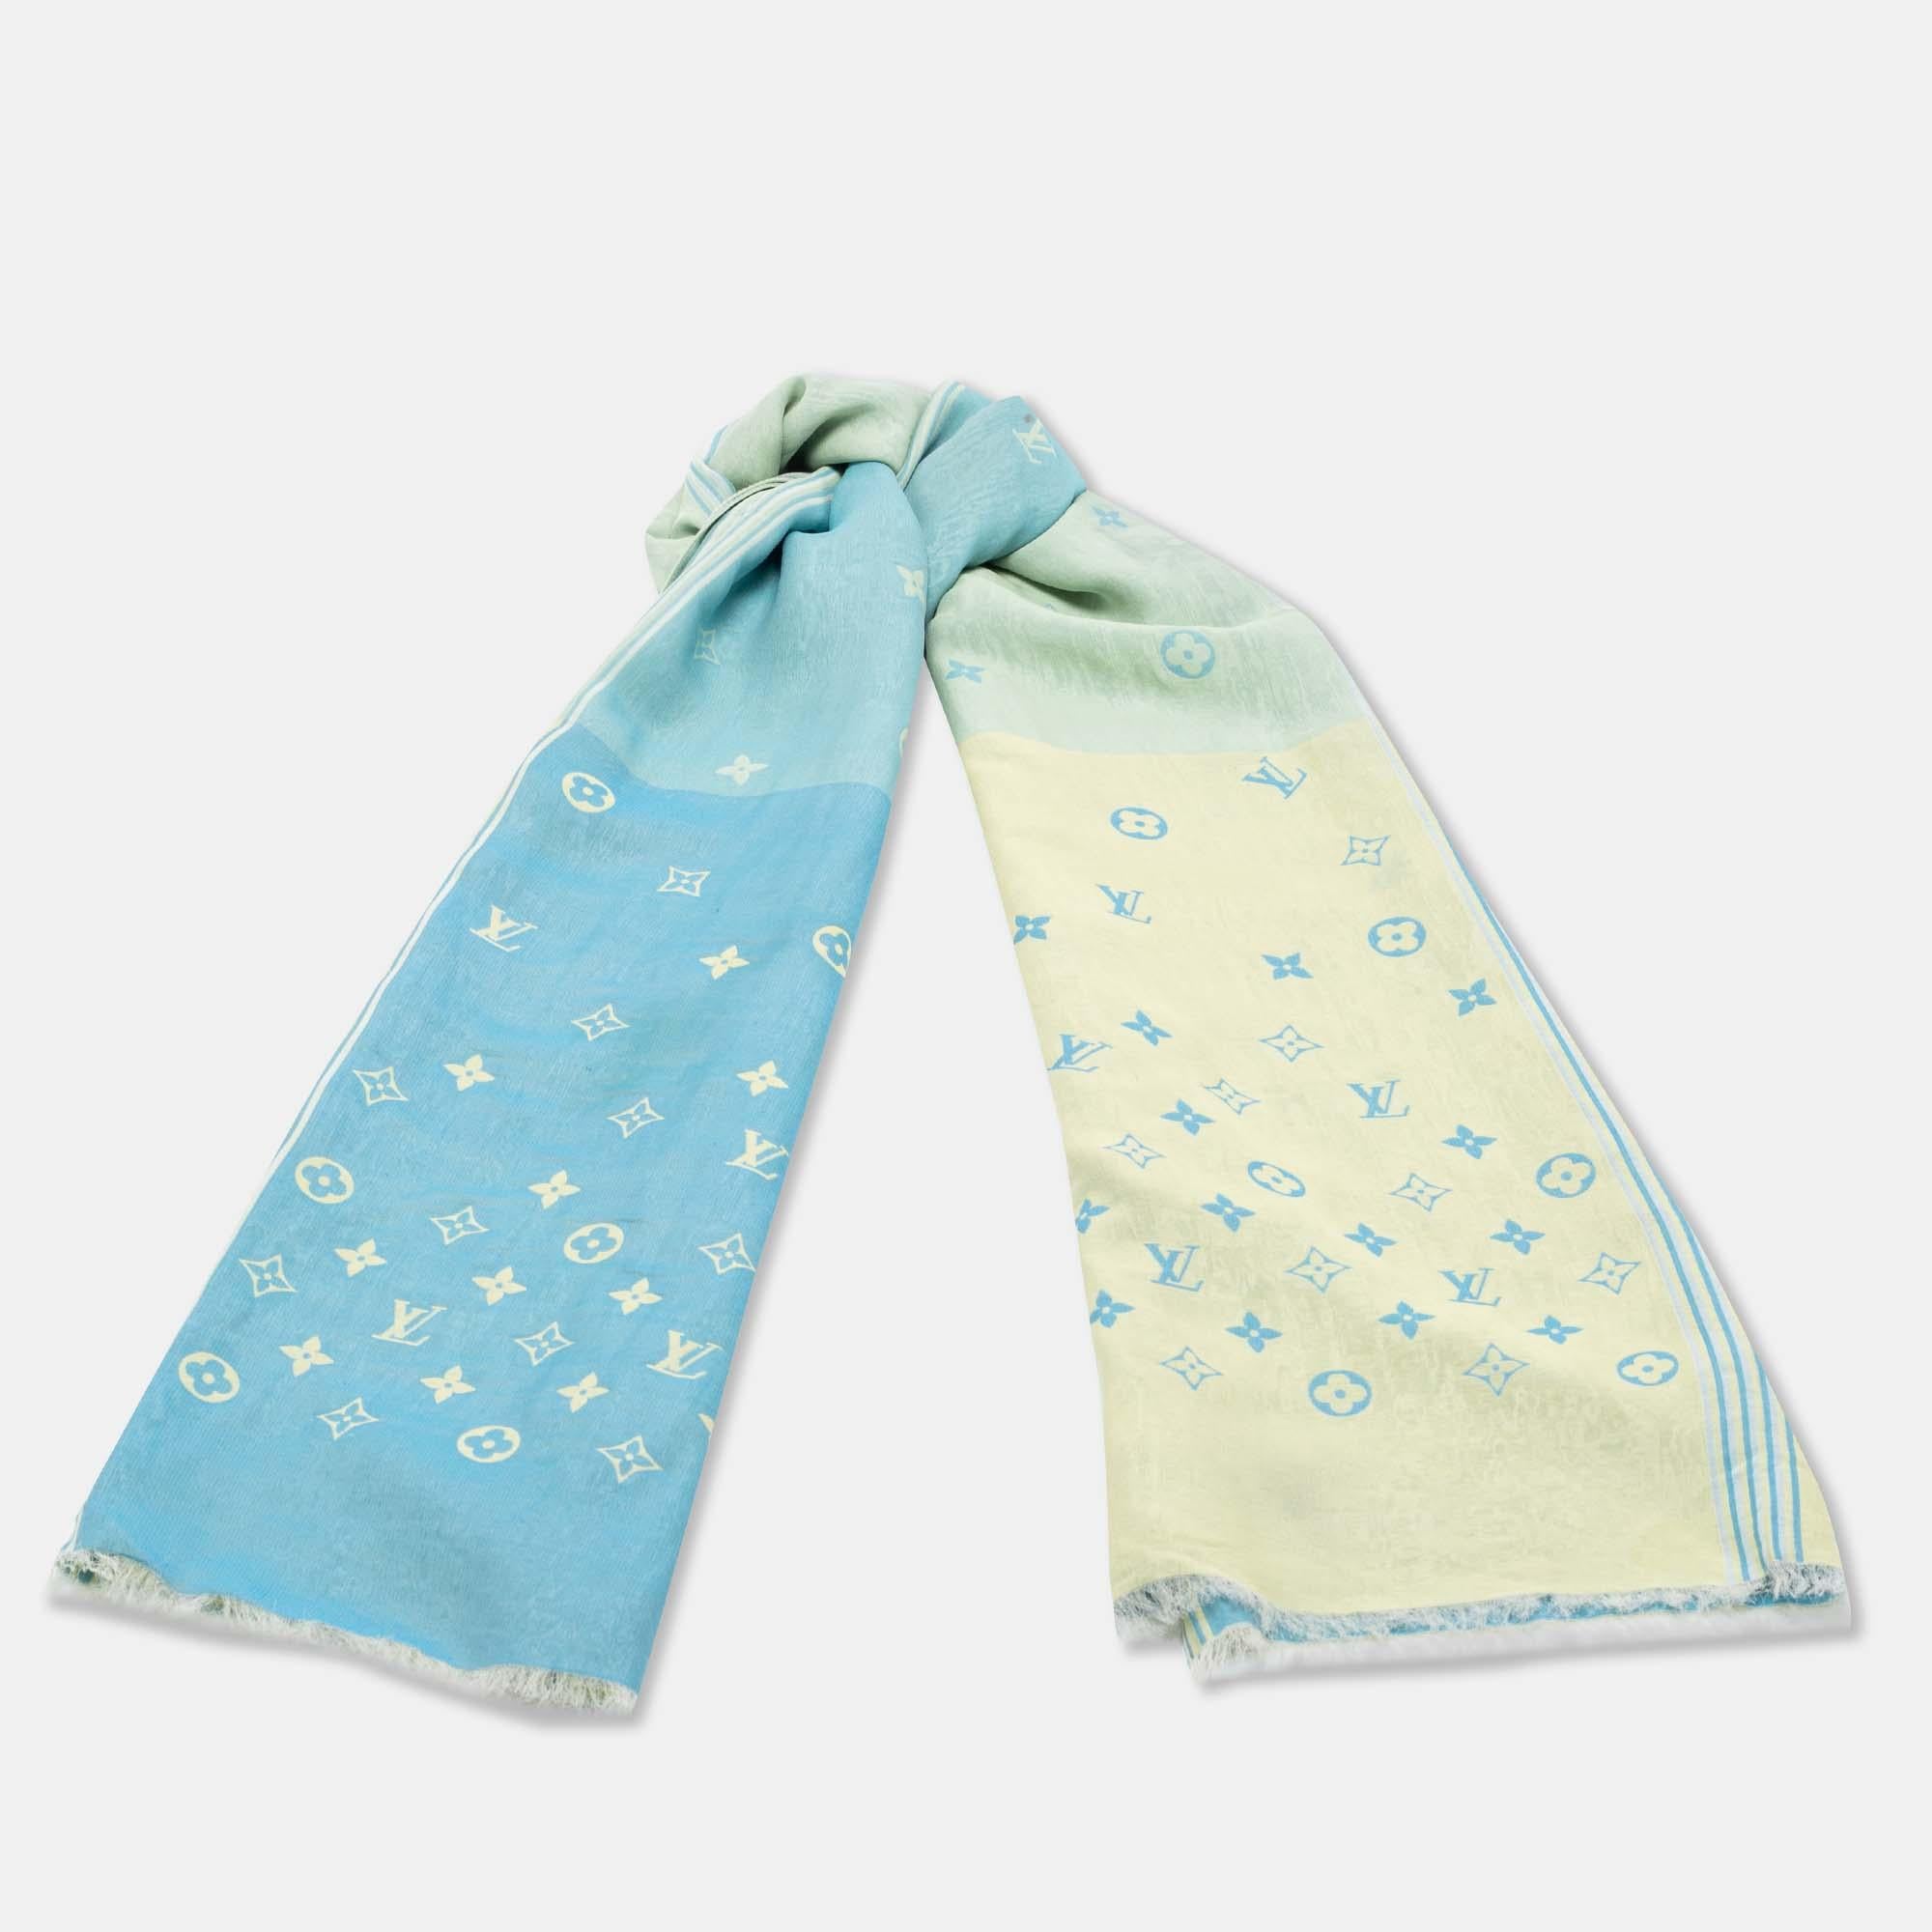 Coming from the house of Louis Vuitton is this lovely scarf that will highlight any outfit you choose. Created from Monogrammed silk, it comes in shades of blue and yellow. Grab it today, and flaunt it like a fashionista!

